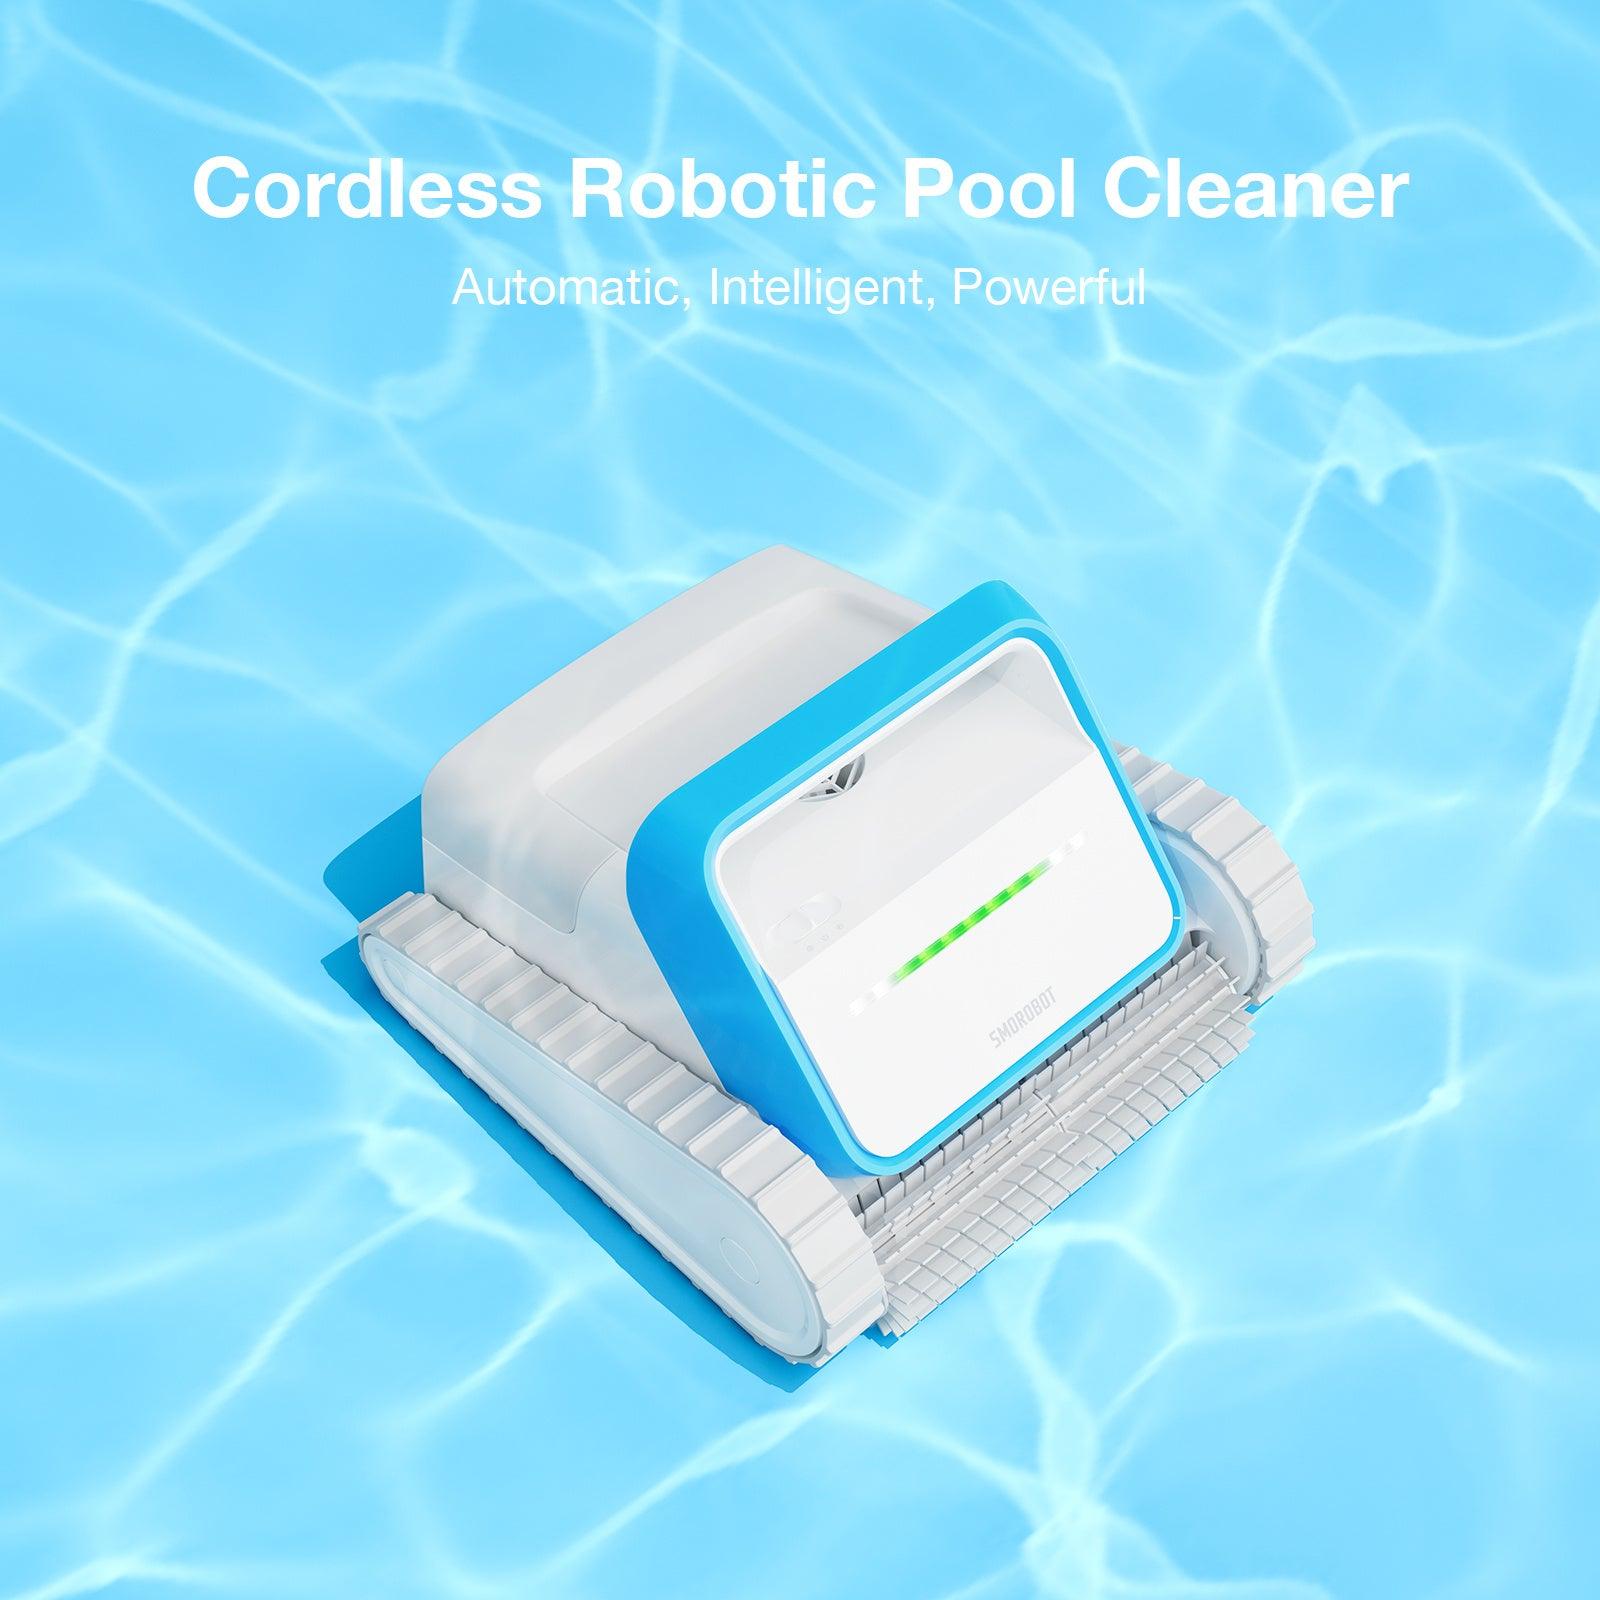 LAZYBOT P01 Cordless Robotic Pool Cleaner – Automatic Wall Climbing Pool Vacuum Cleaner, Smart Navigation, Self-Parking, Lasts 150 Mins with 130W Suction Power, Ideal for In-Ground Pools up to 2500 ft² - Lazy Pro